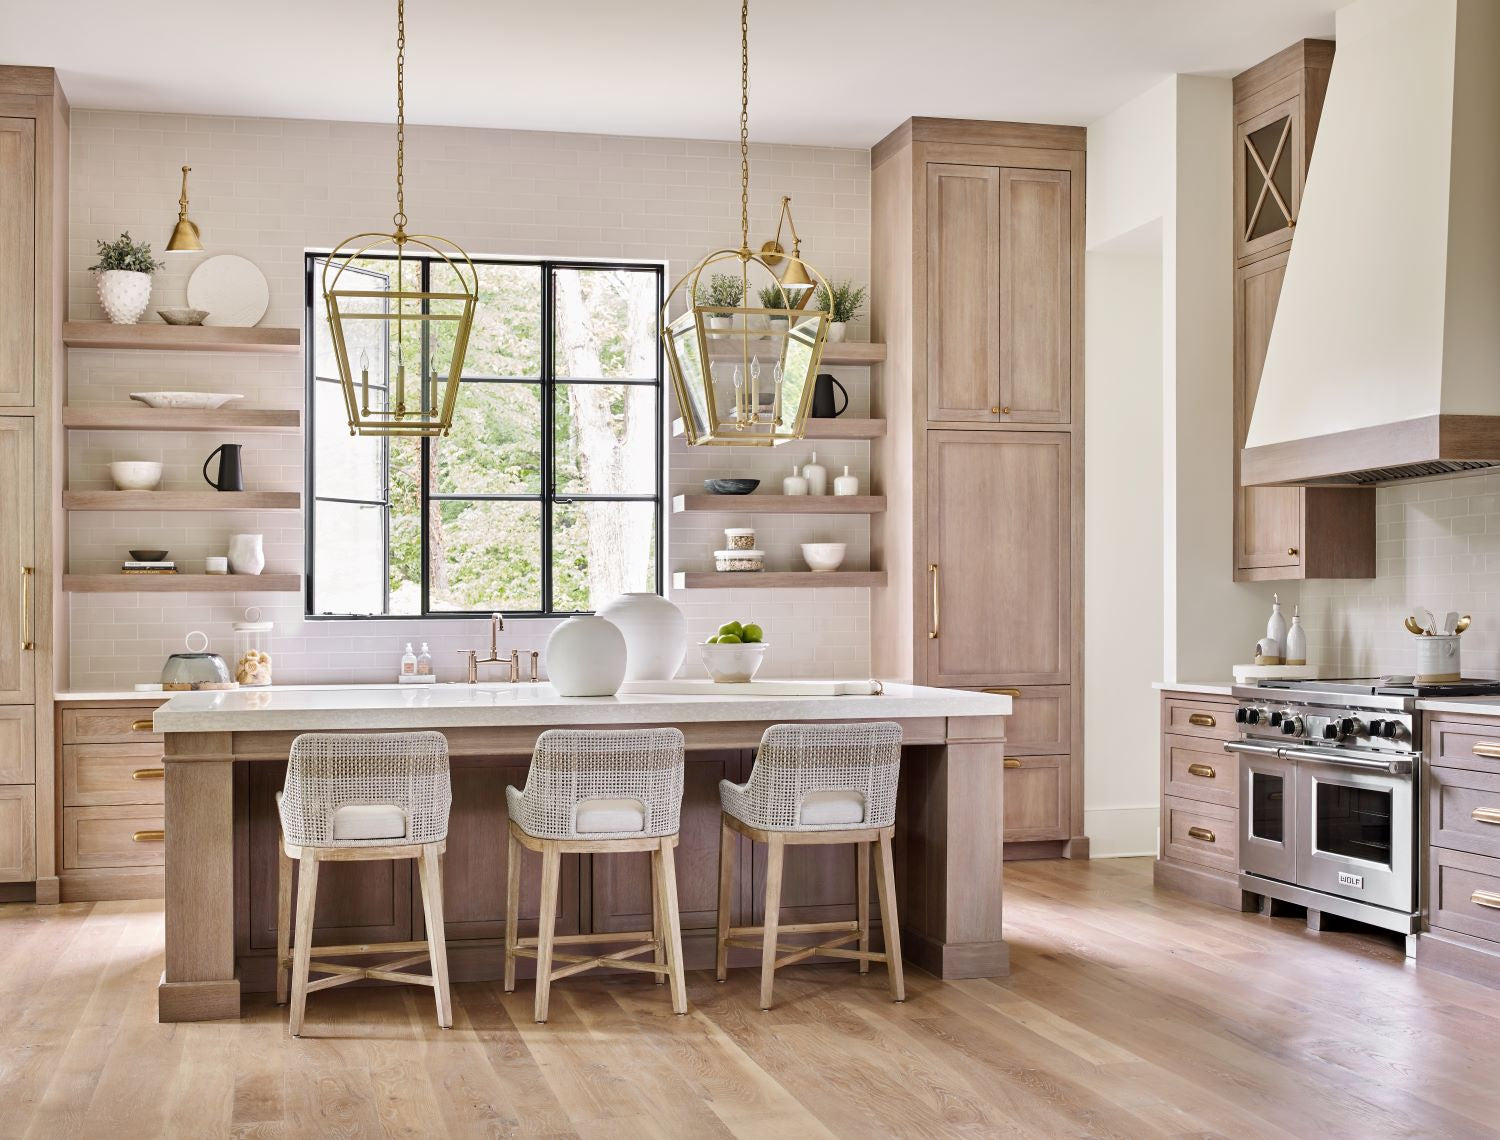 Photo of an open plan kitchen in light tones with wood and gold accents by Linen and Flax Co.